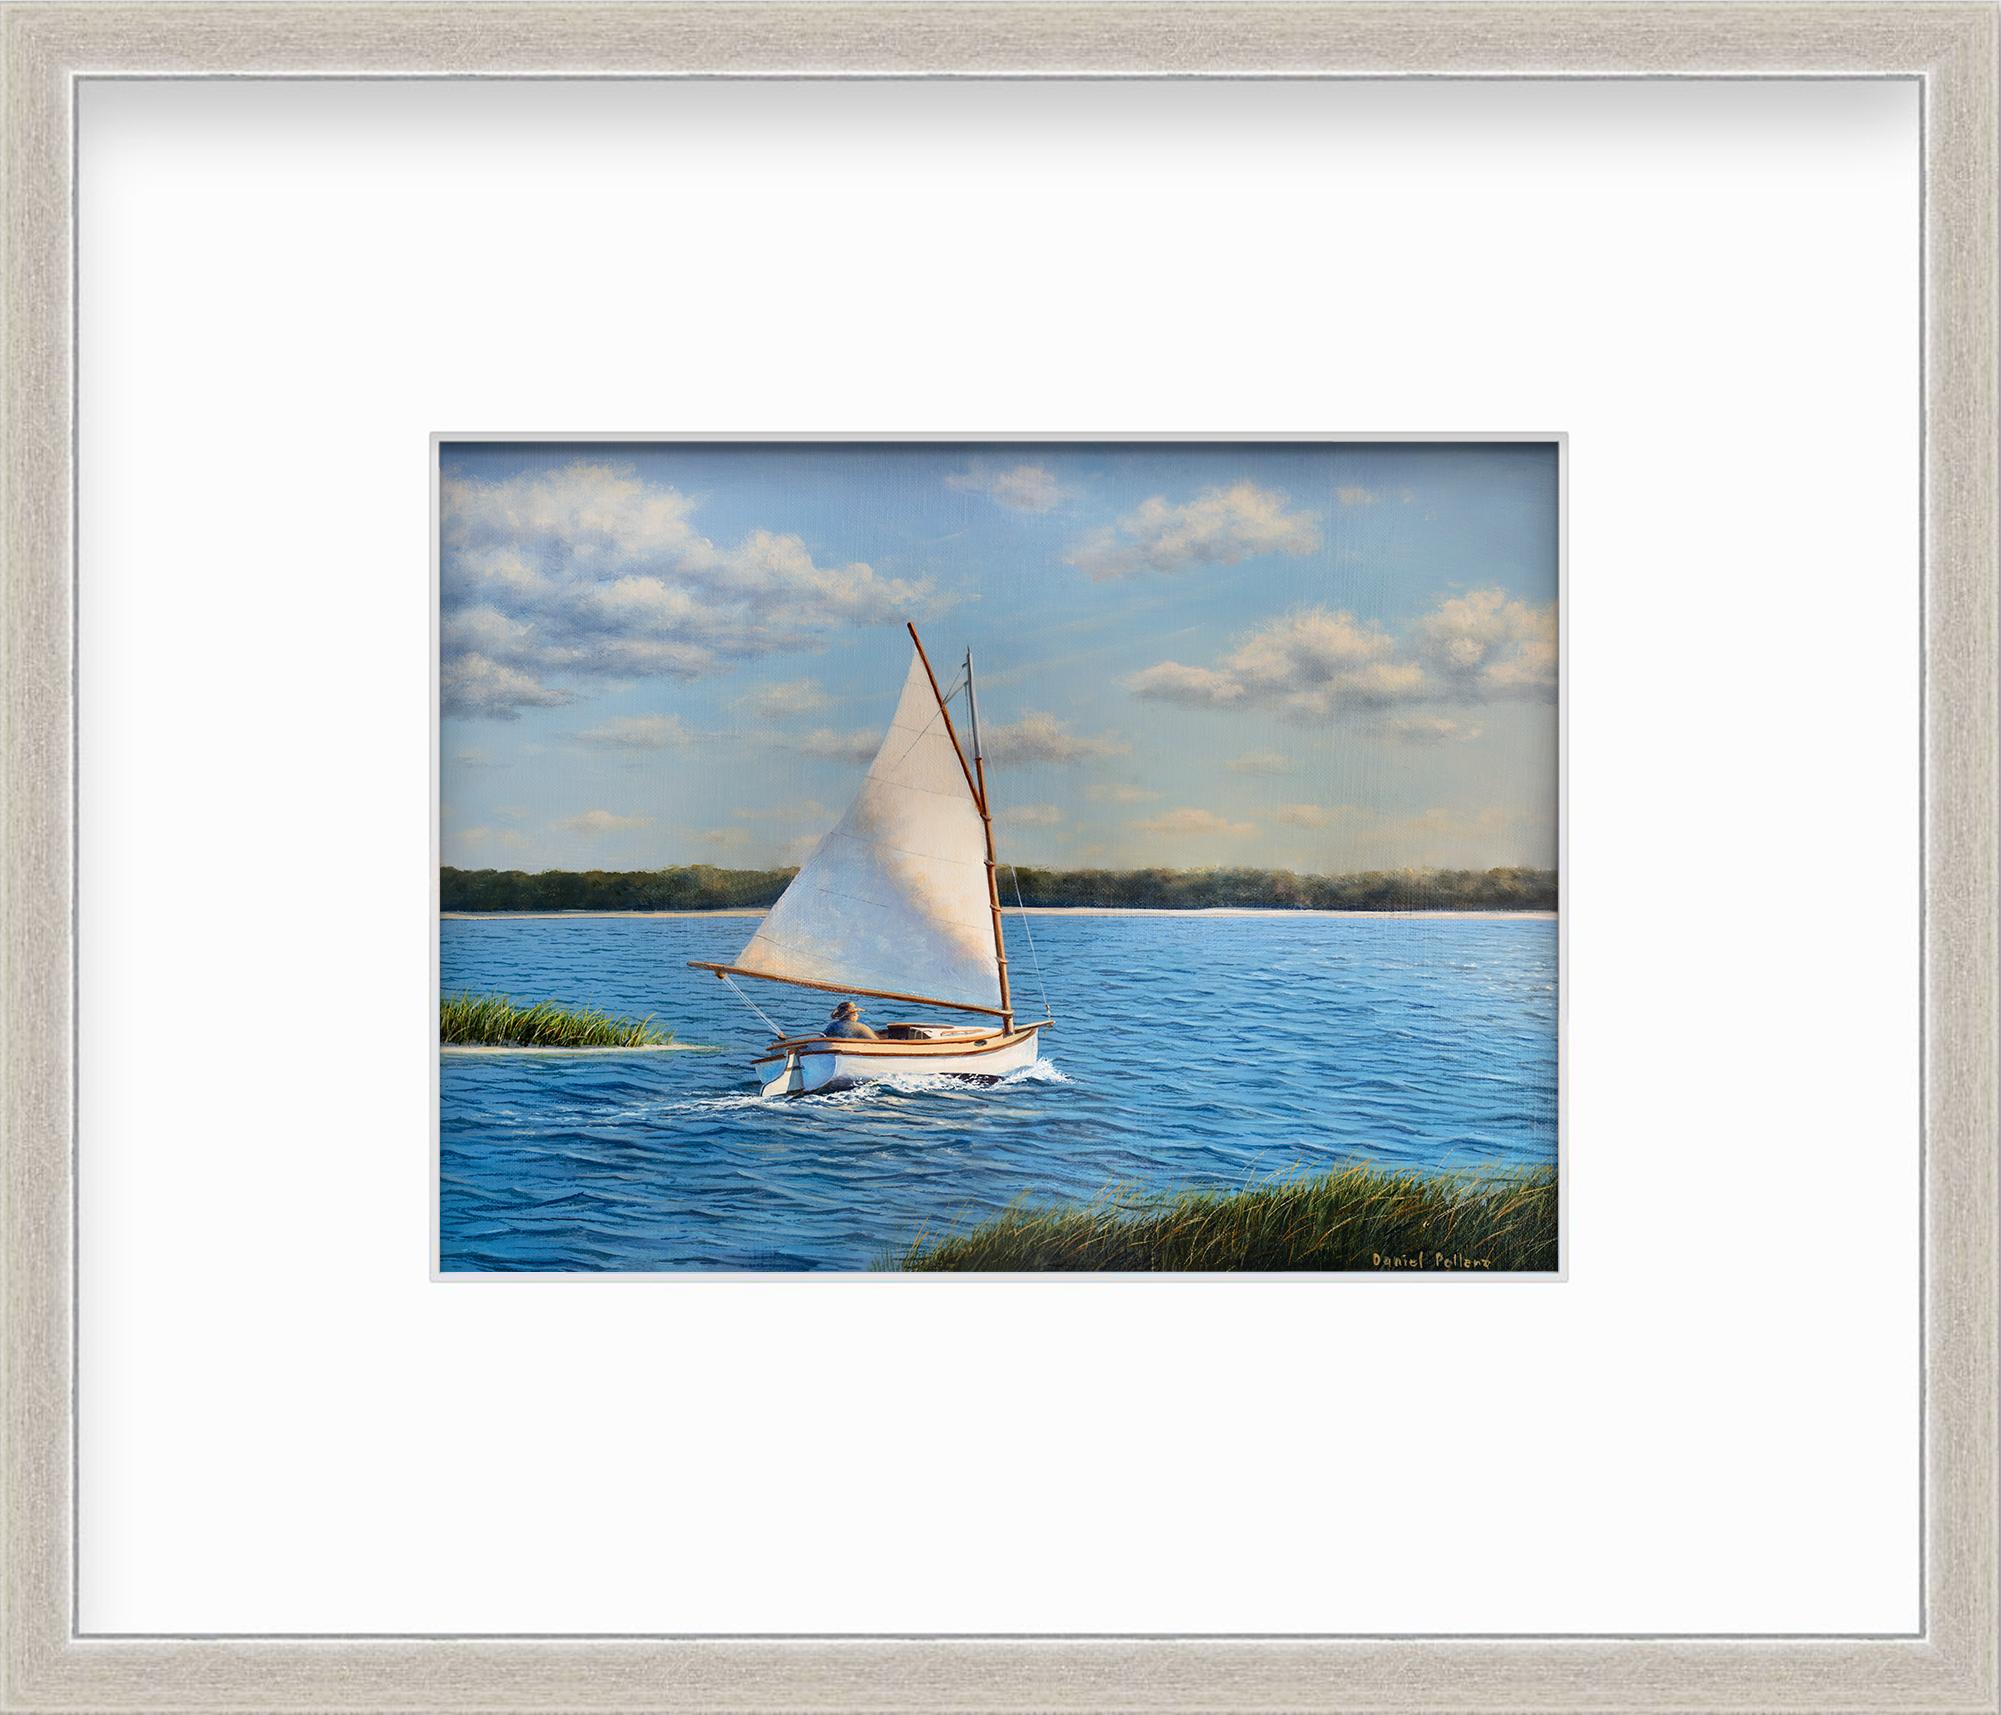 Daniel Pollera Landscape Print - "Sailing Out to the Bay, " Framed Limited Edition Print, 6" x 9"